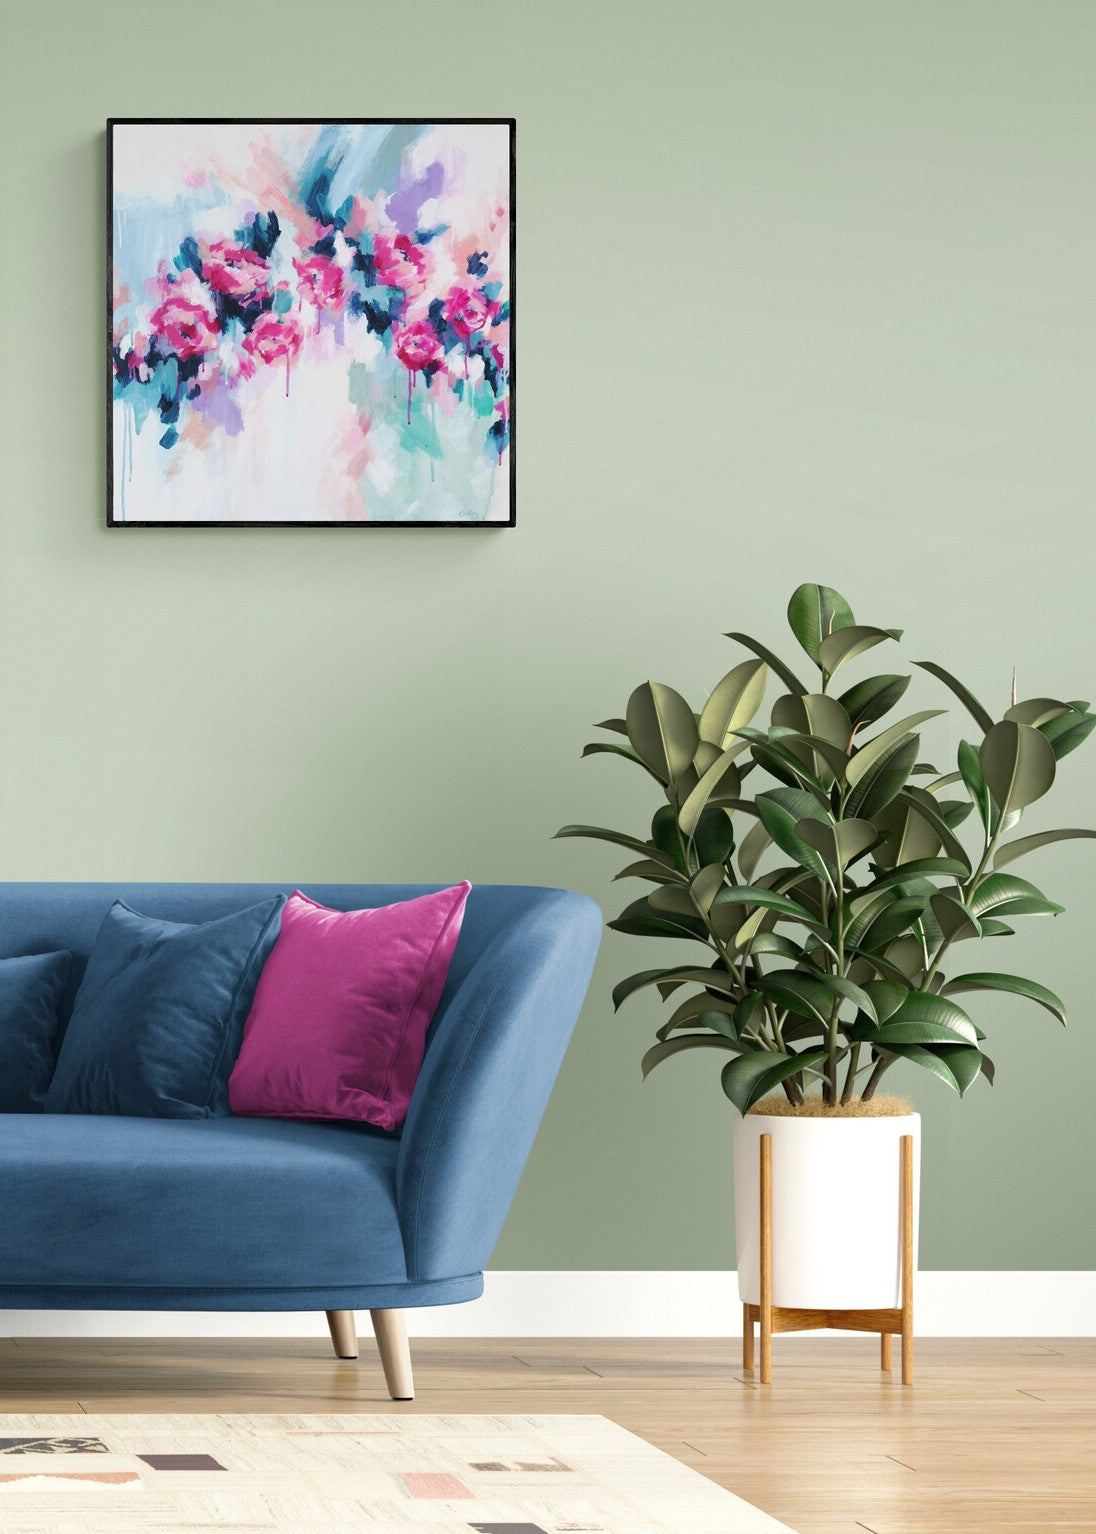 Contemporary original abstract floral painting by Judy Century 'Fancy Free' 61x61cm in stylish living room with blue sofa, large plants, green walls